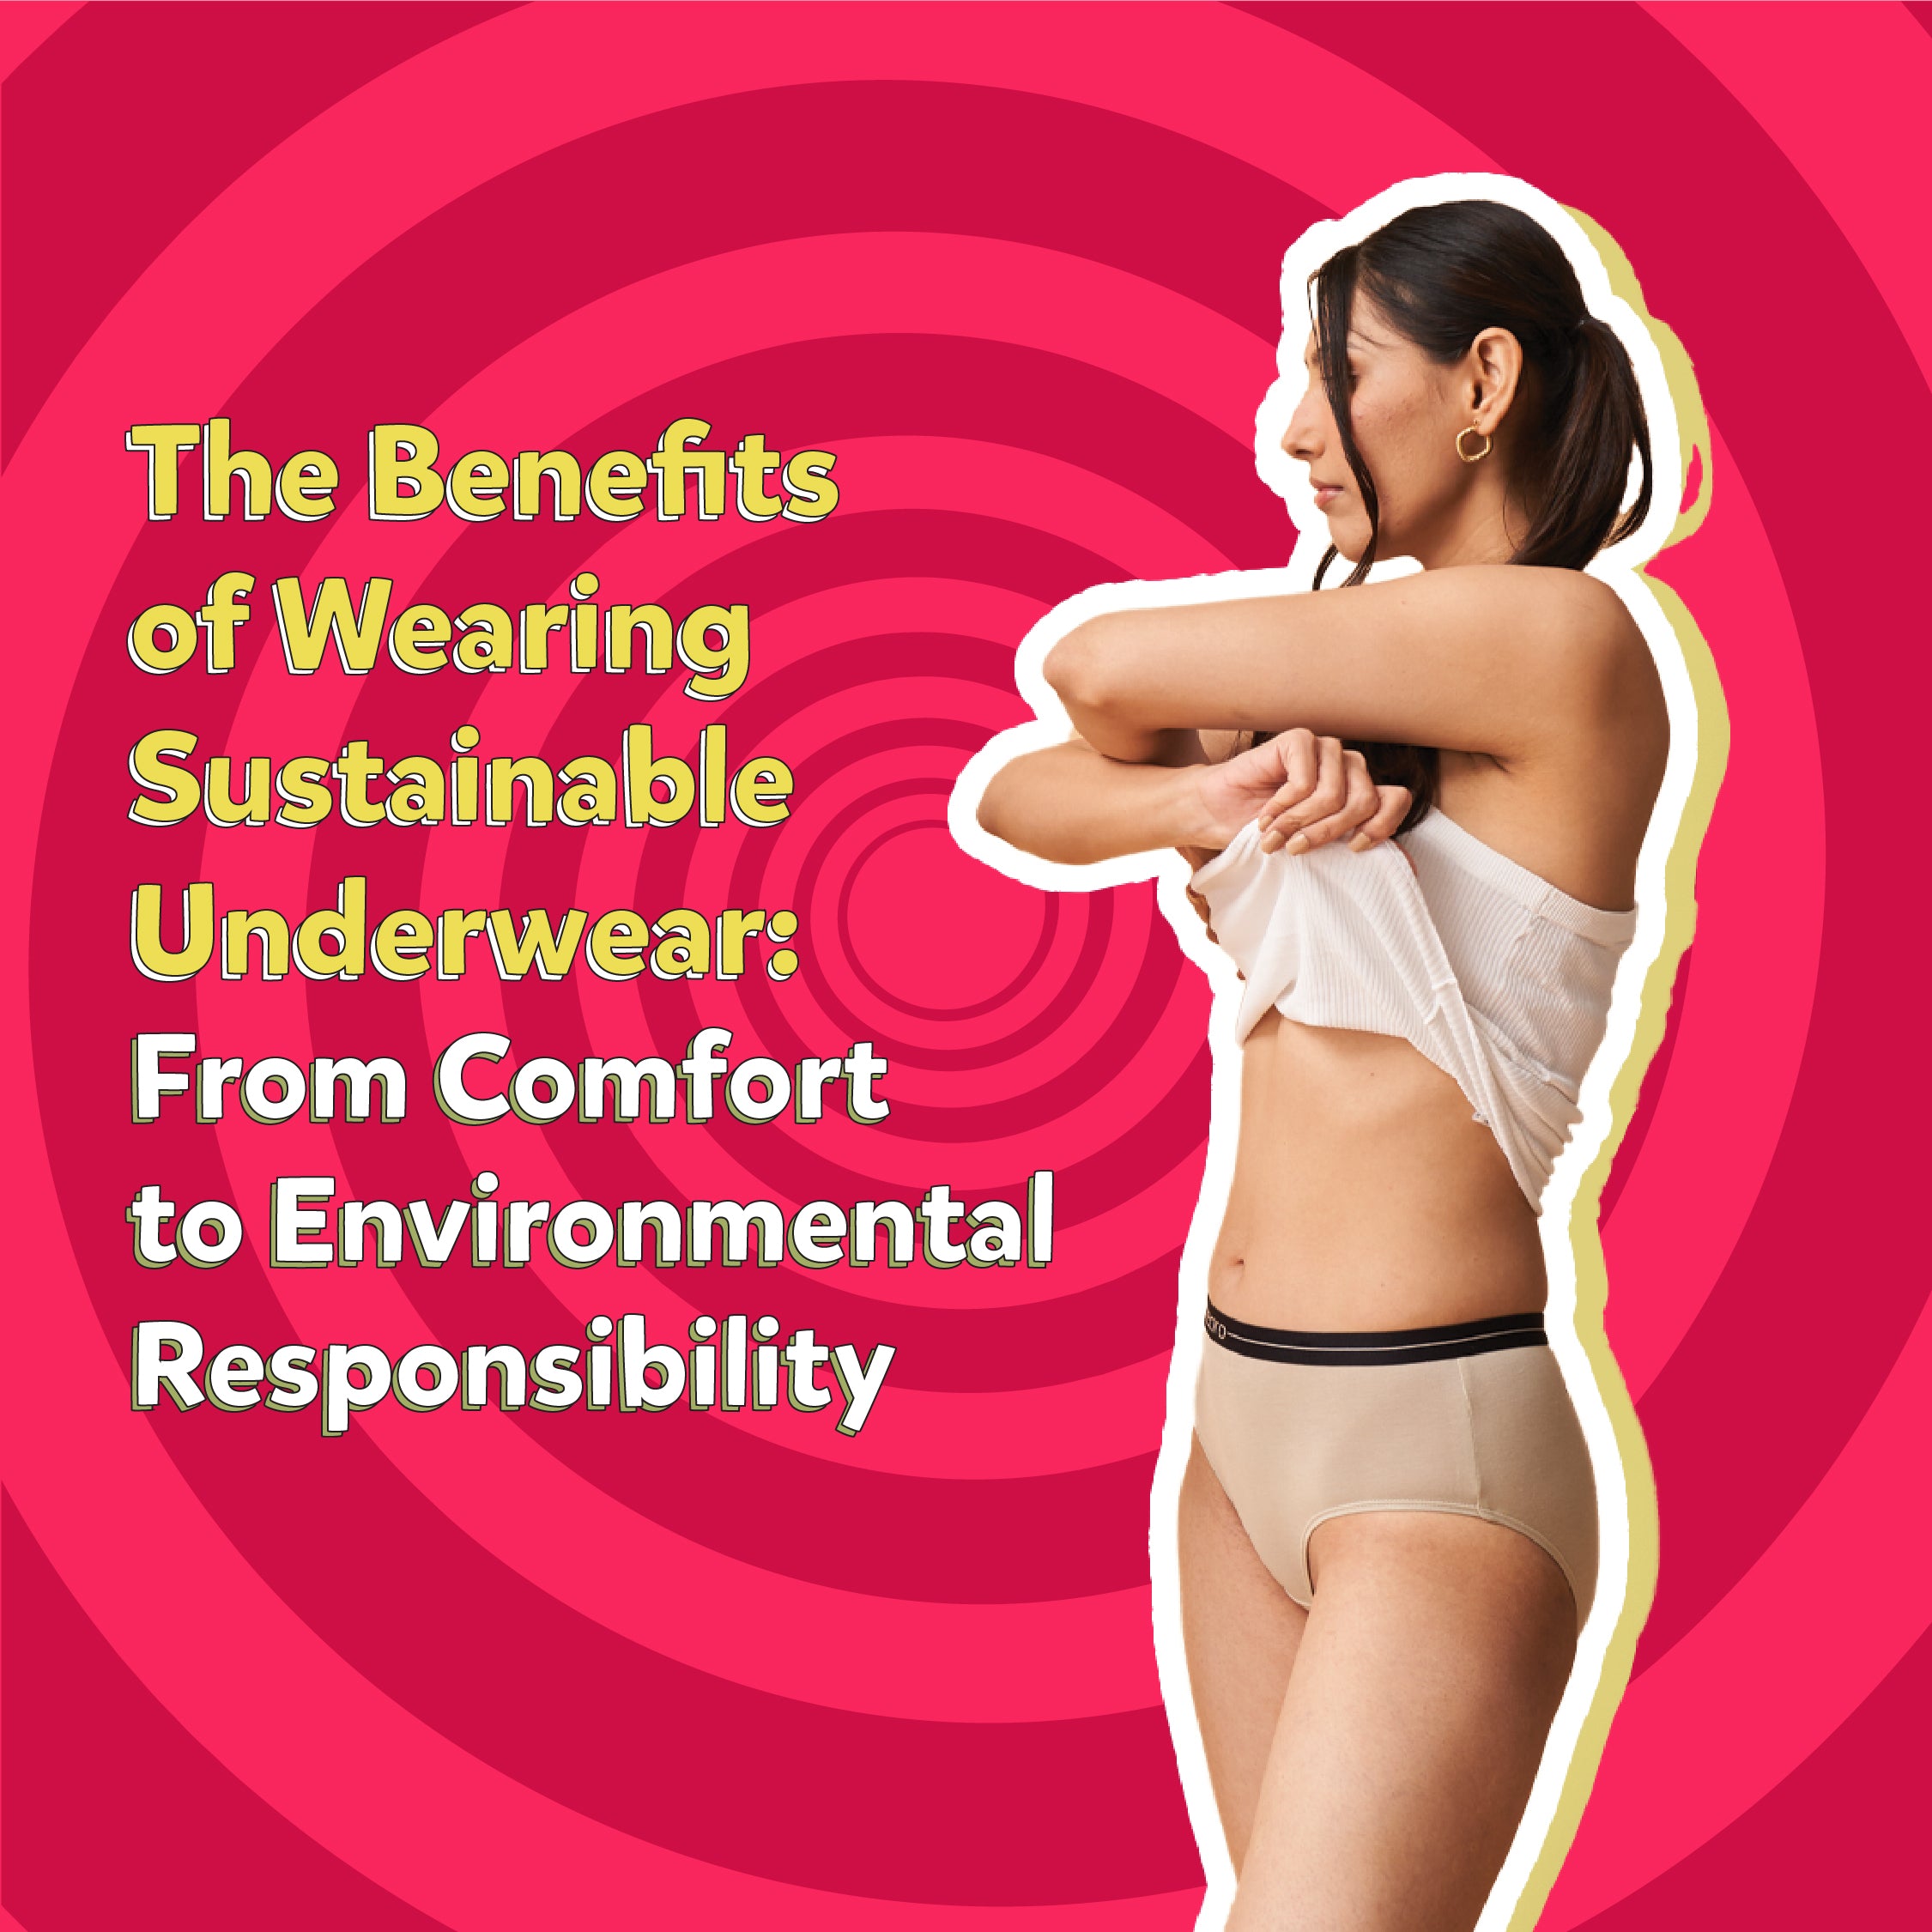 The Benefits of Wearing Sustainable Underwear: From Comfort to